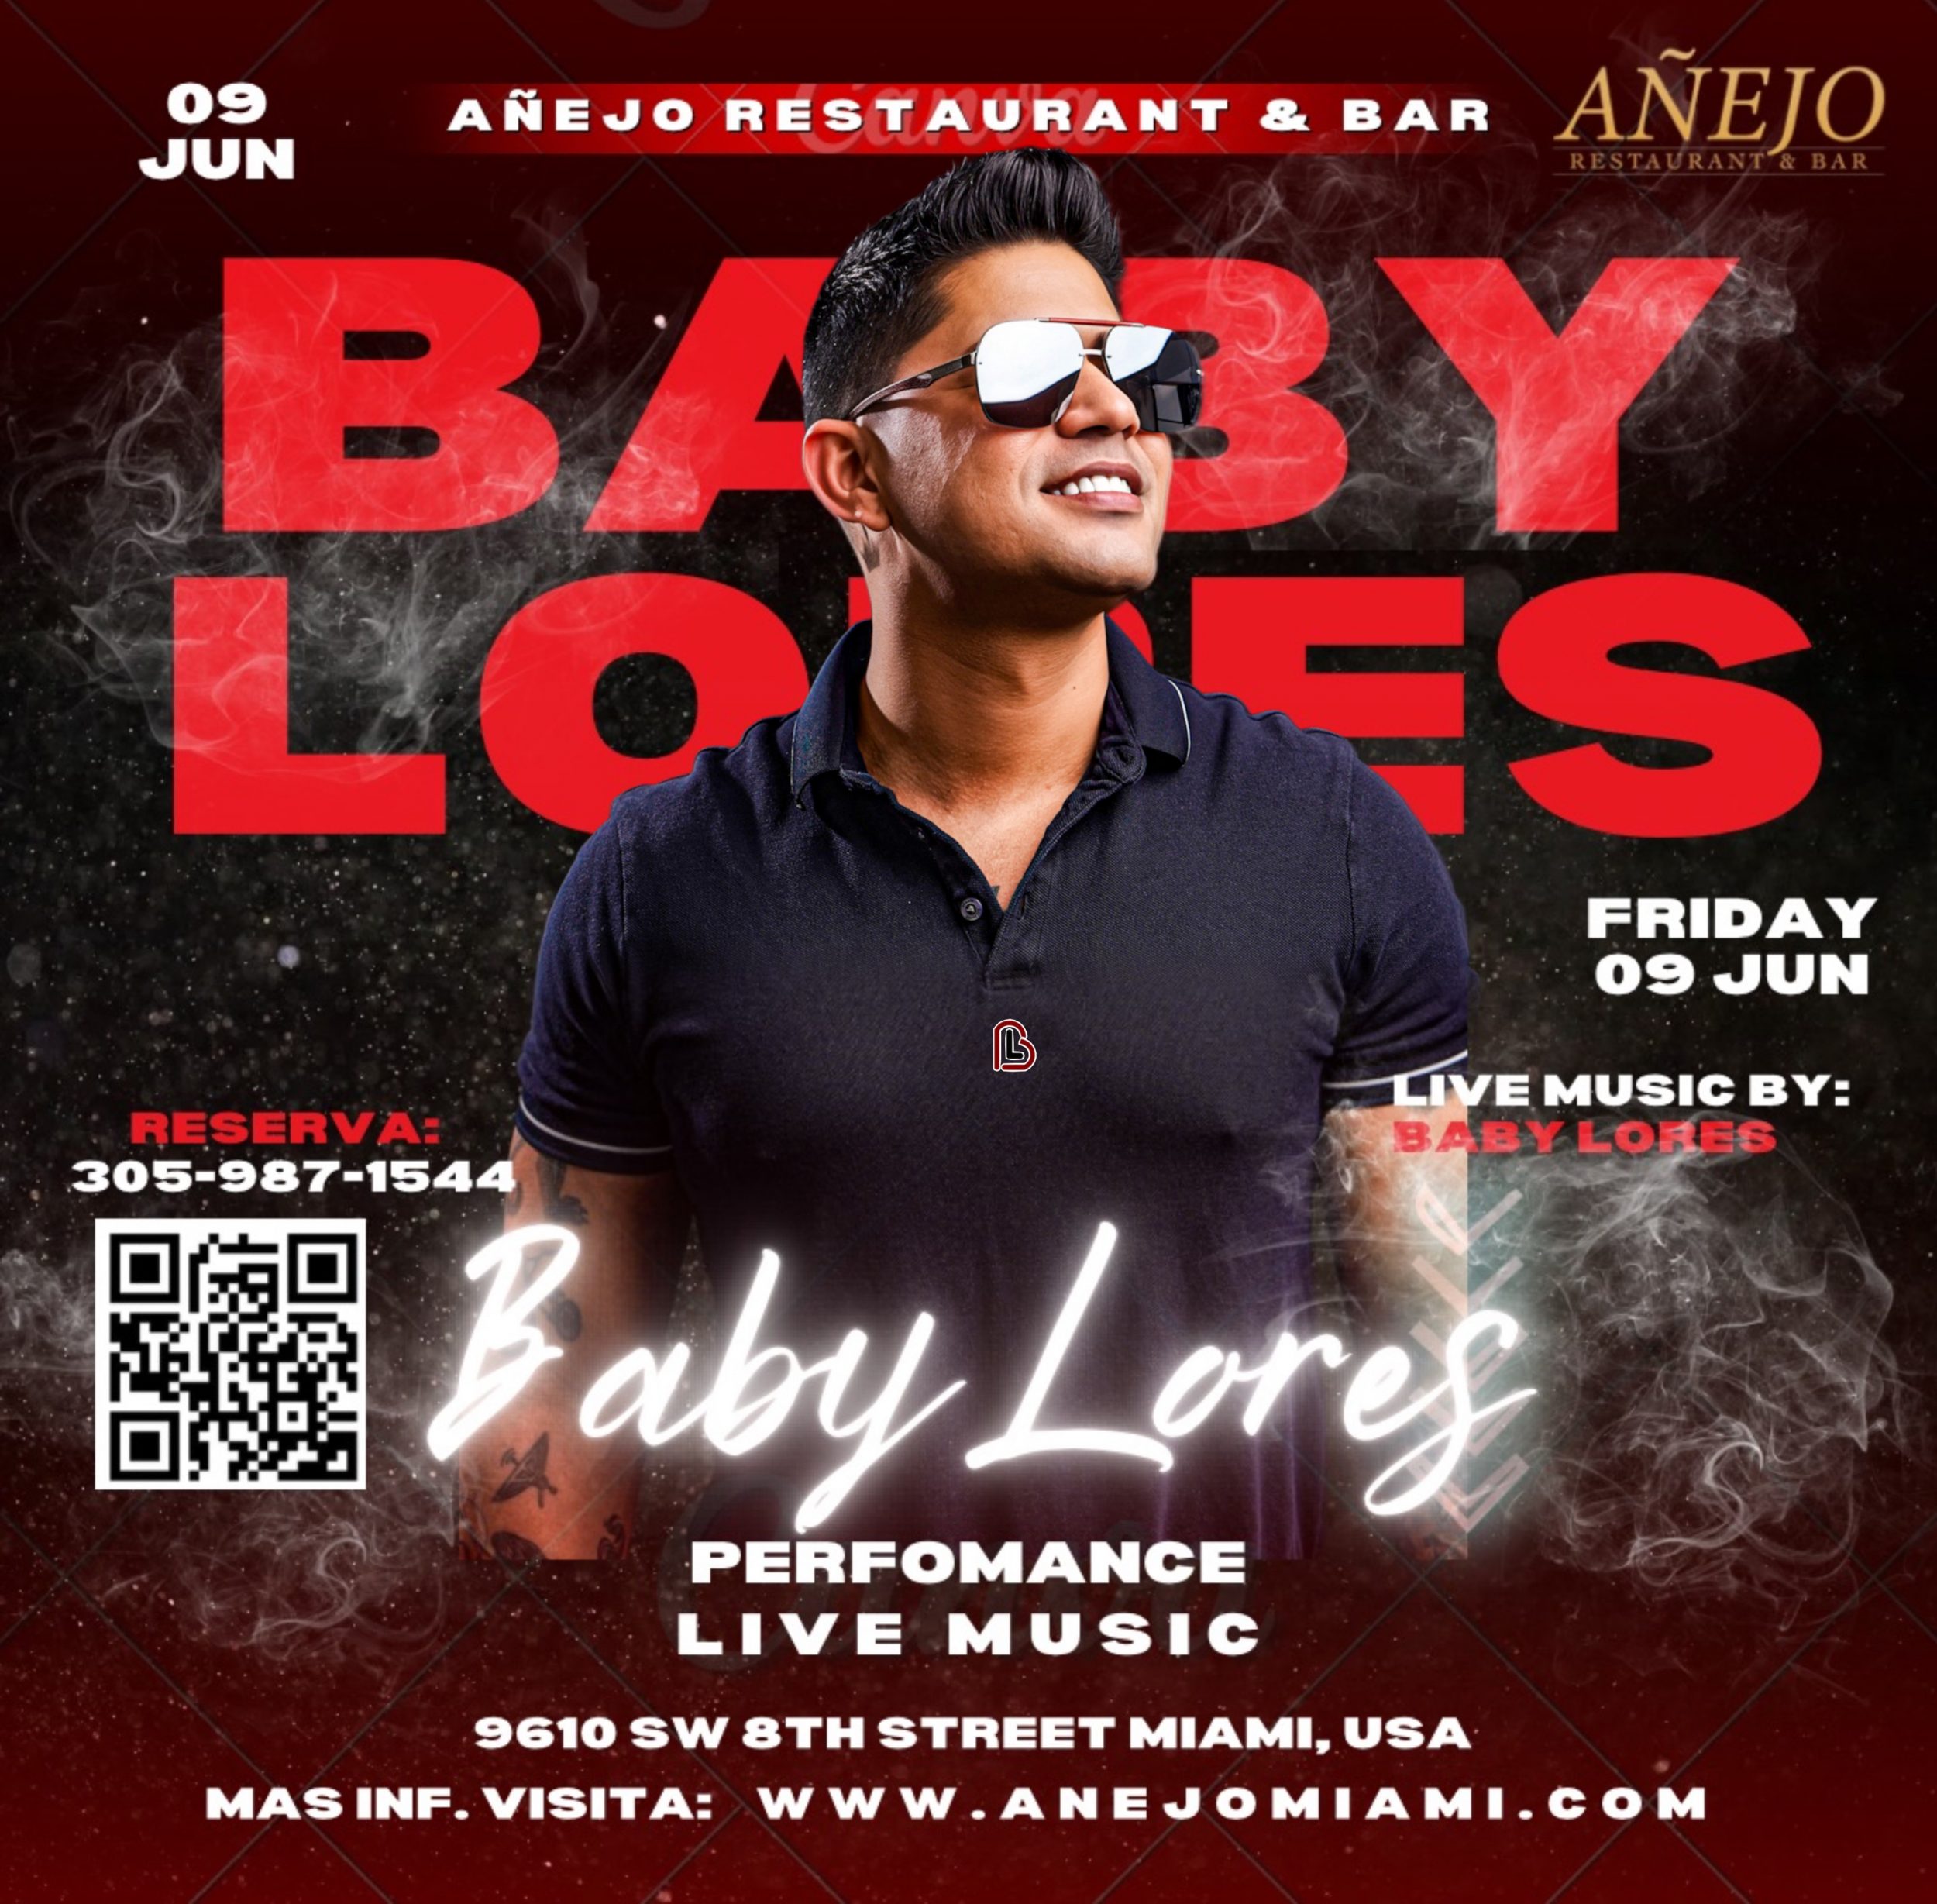 Baby Lores Anejo Restaurant and Bar